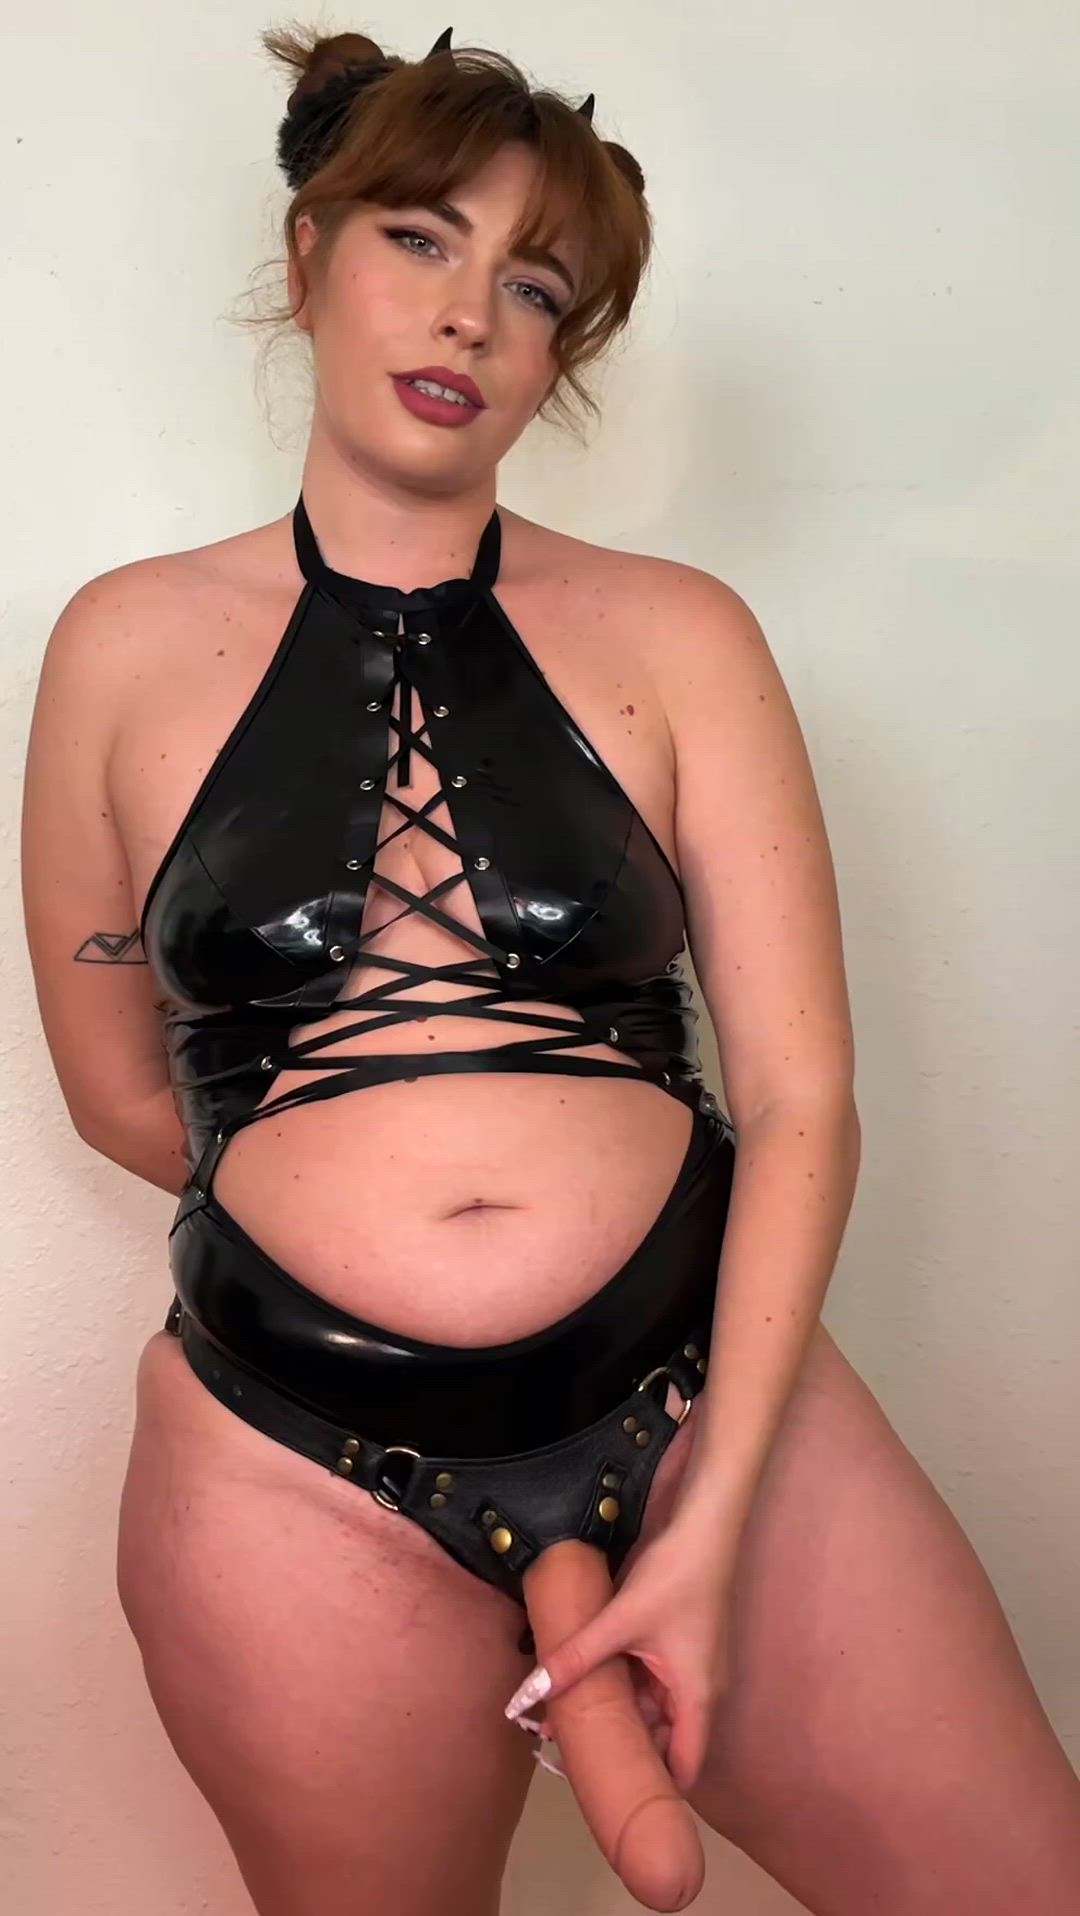 Dildo porn video with onlyfans model sexysadie1995 <strong>@sexysadie1995</strong>